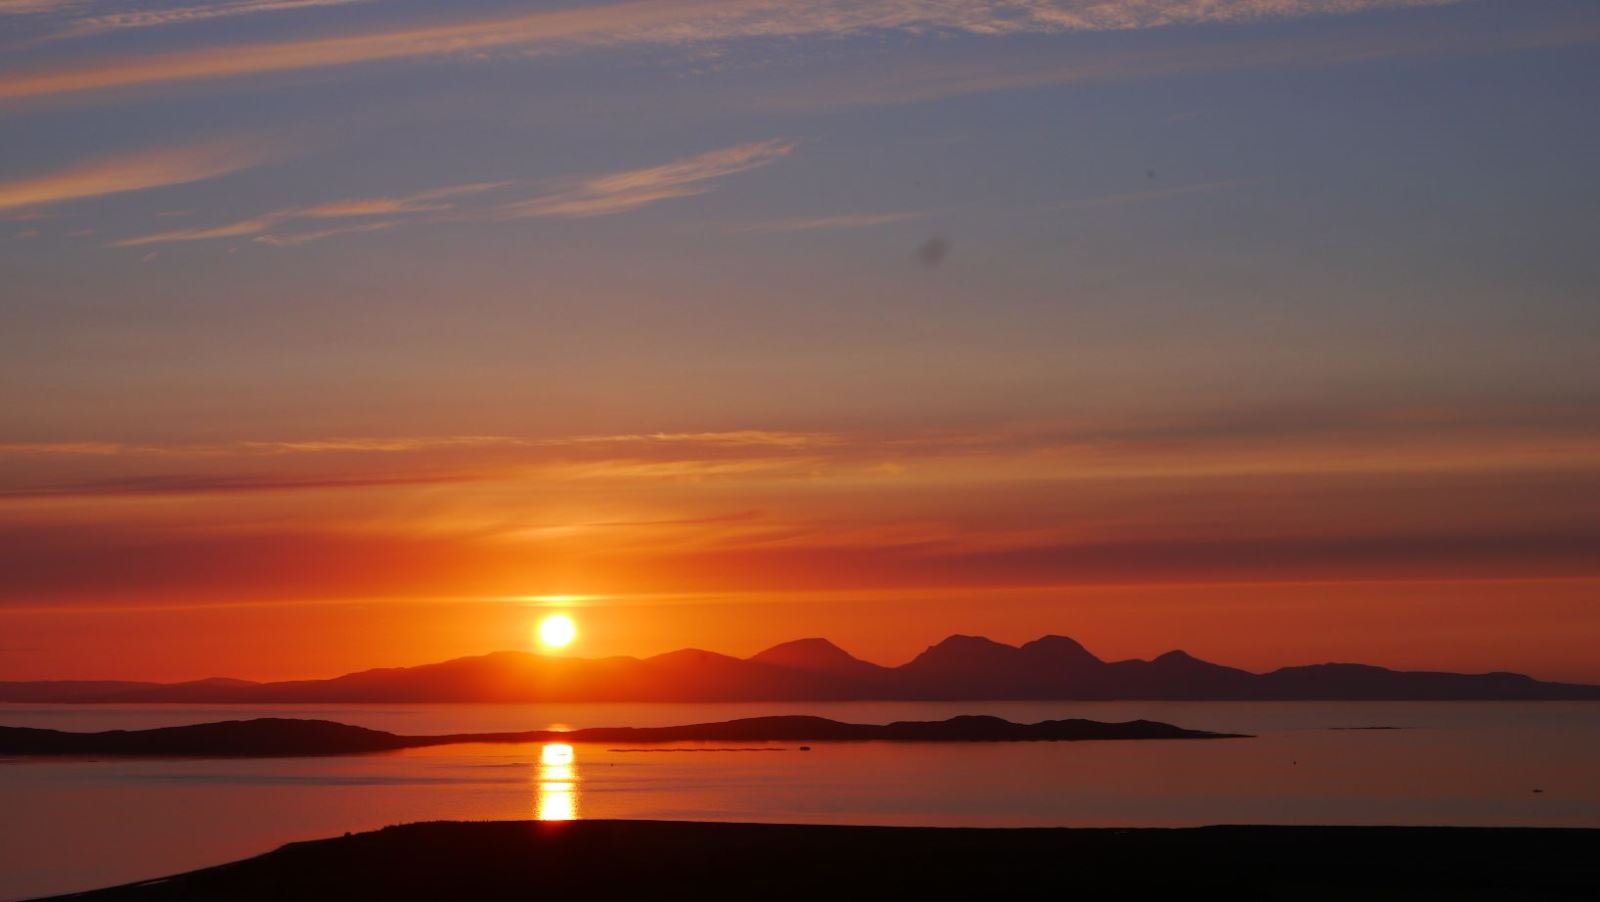 spectacular sunsets and views on Kintyre peninsula